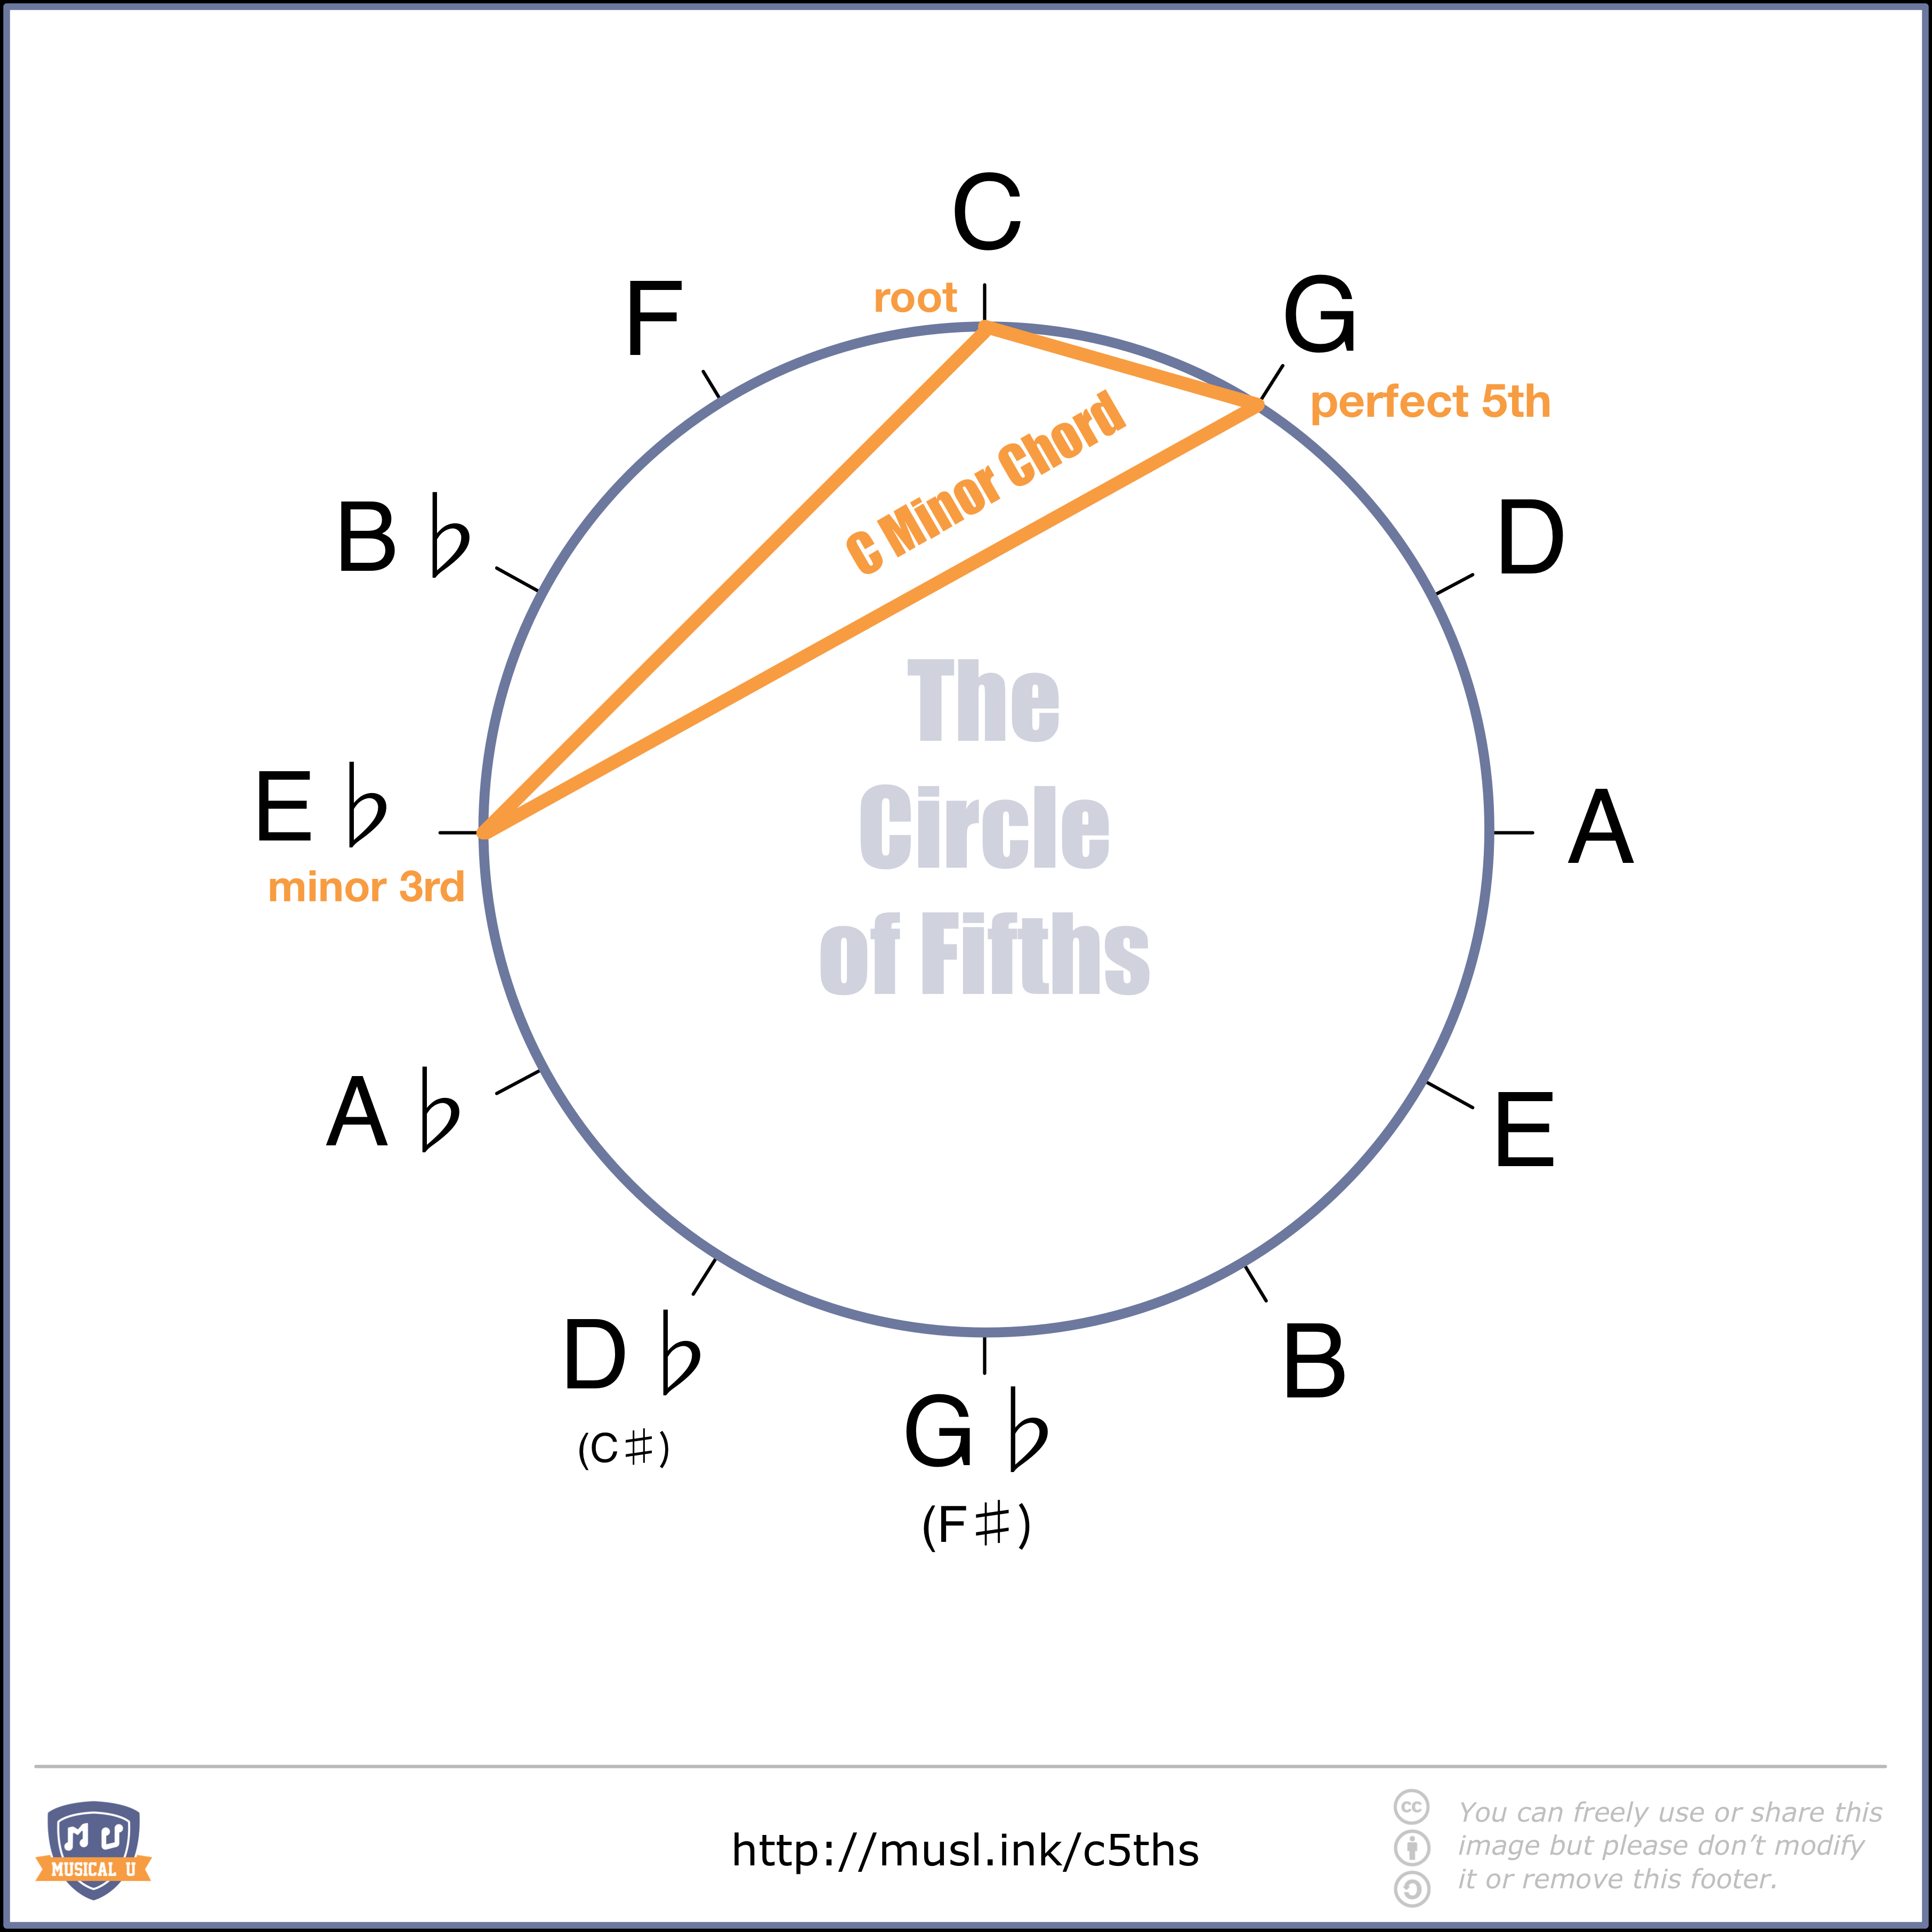 C minor chord shown in circle of fifths